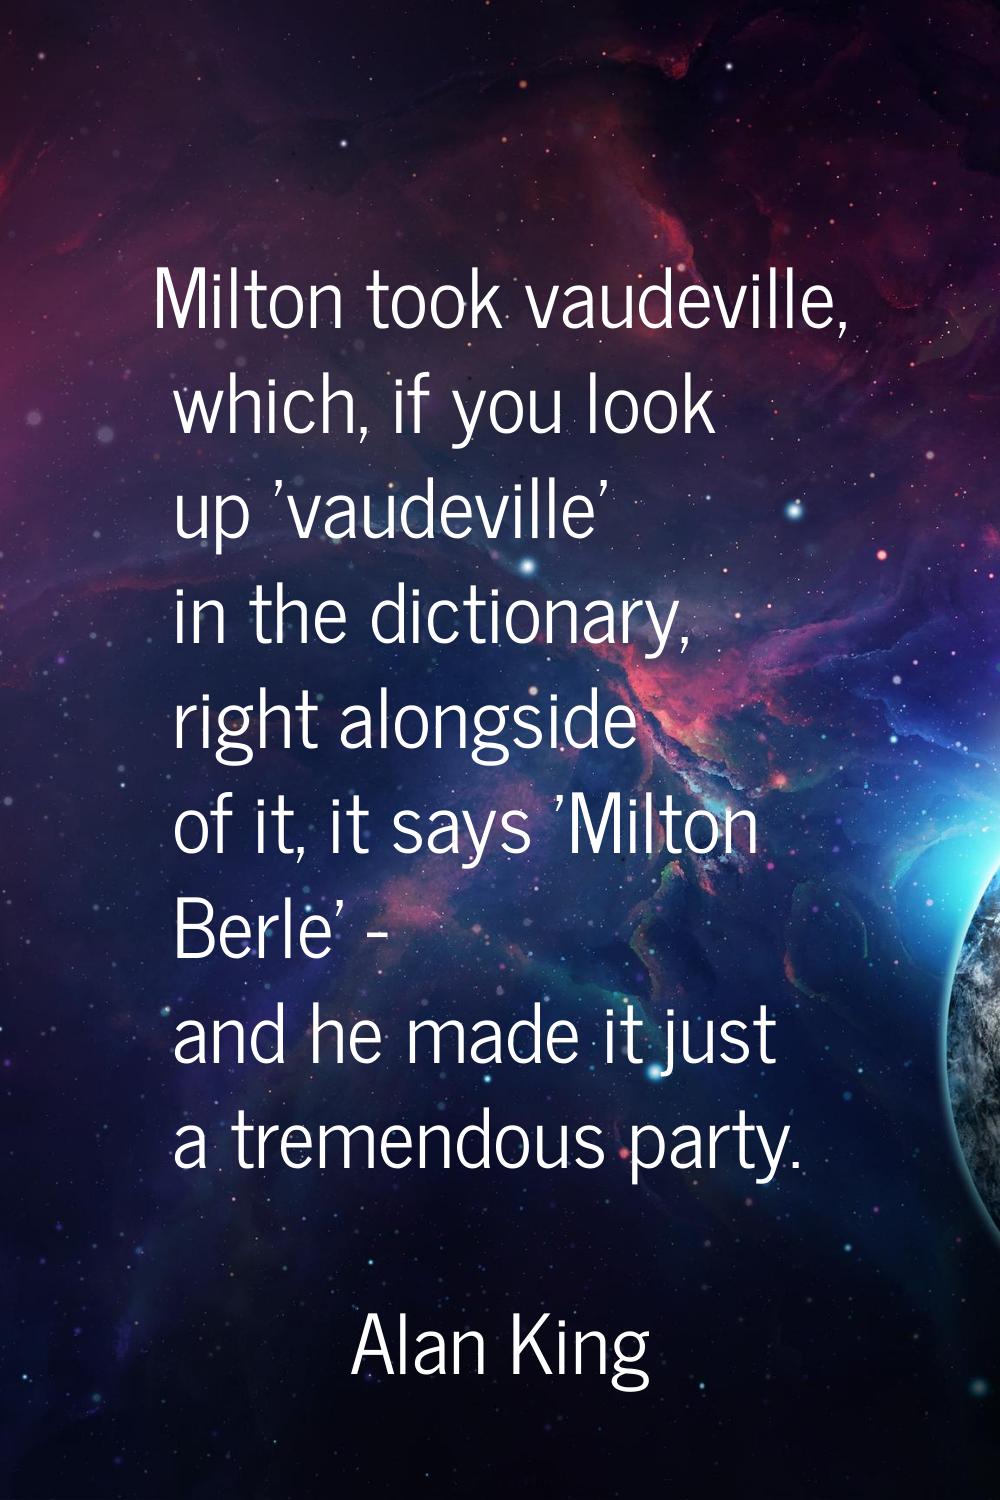 Milton took vaudeville, which, if you look up 'vaudeville' in the dictionary, right alongside of it